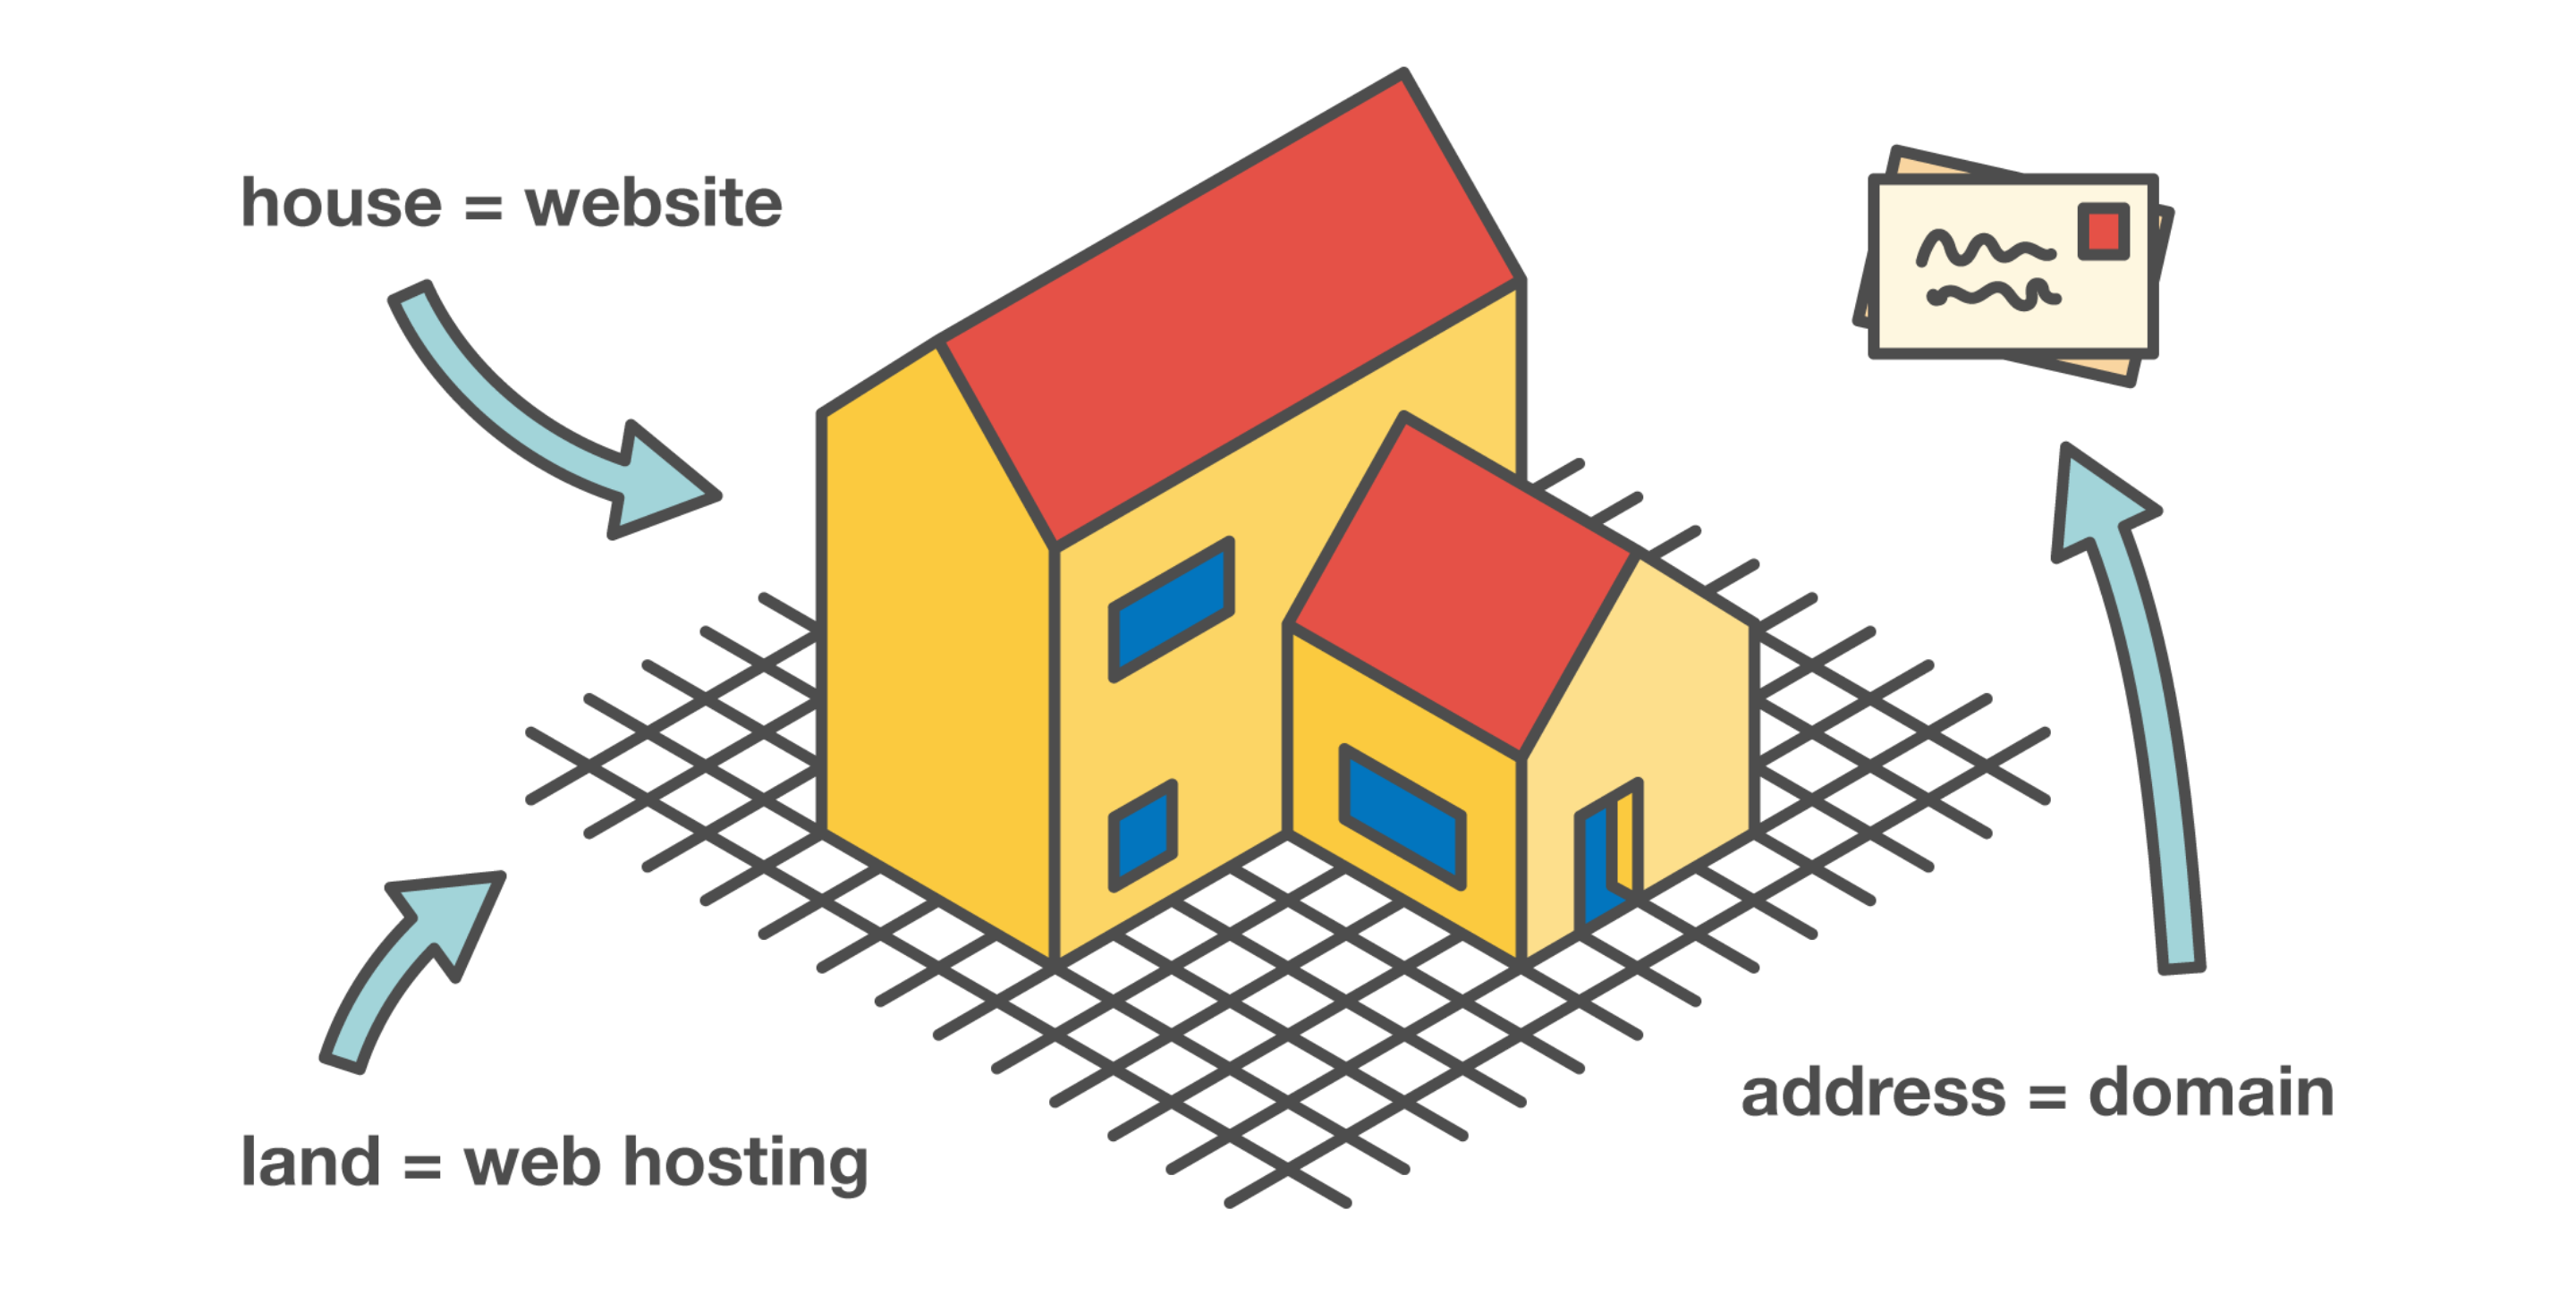 An illustration showing the relationship between a domain name, web hosting and a website